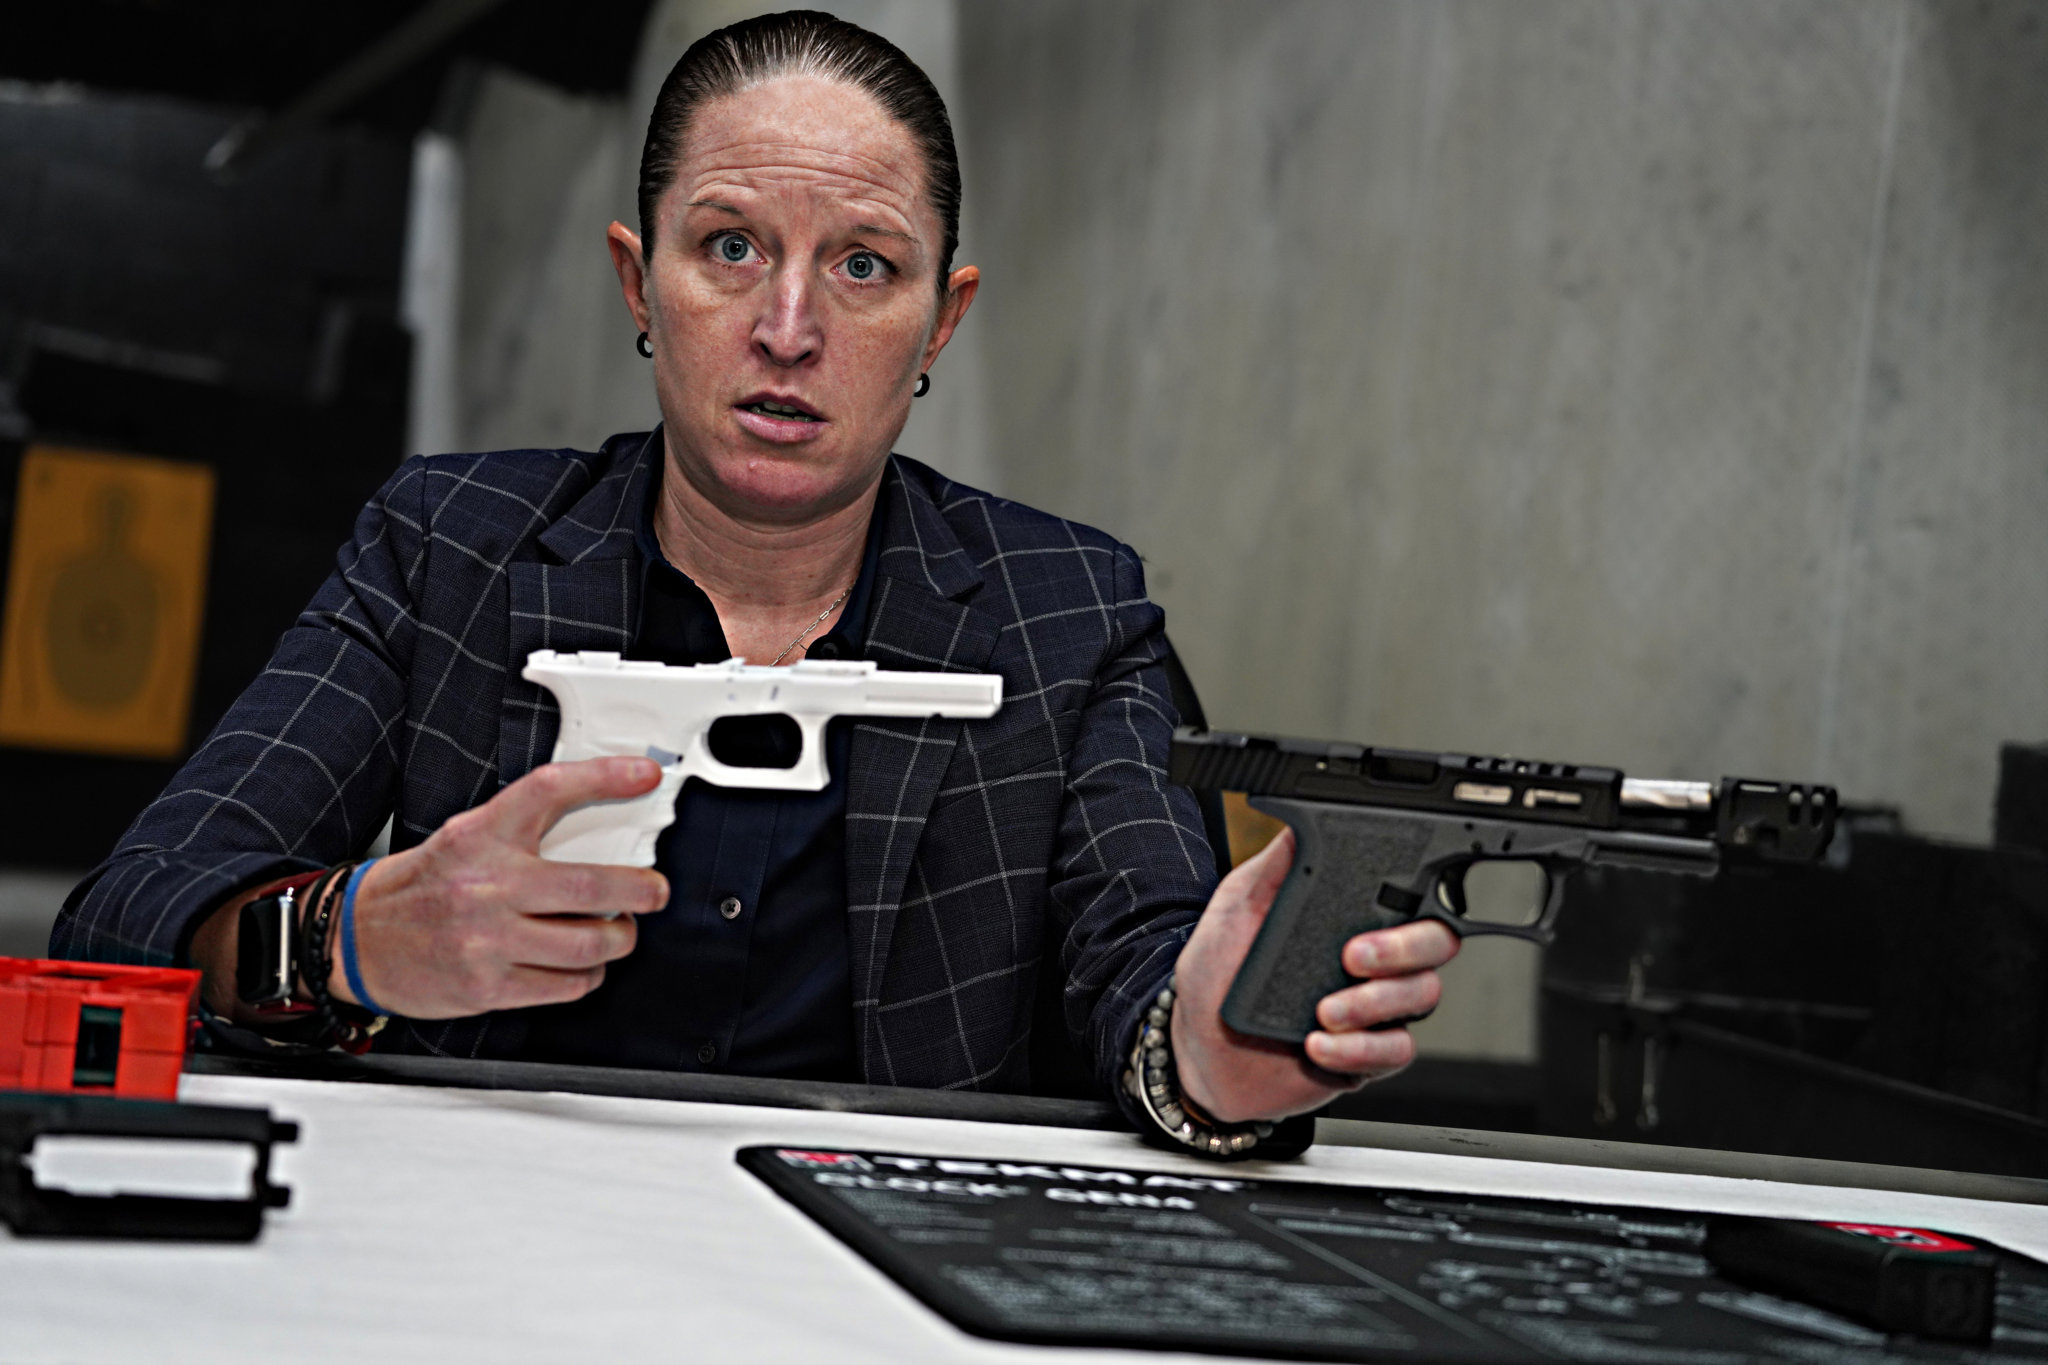 Ghost Gun Hunters An Exclusive Look At How The Nypd Is Working To Stop 3d Printed Illegal Guns